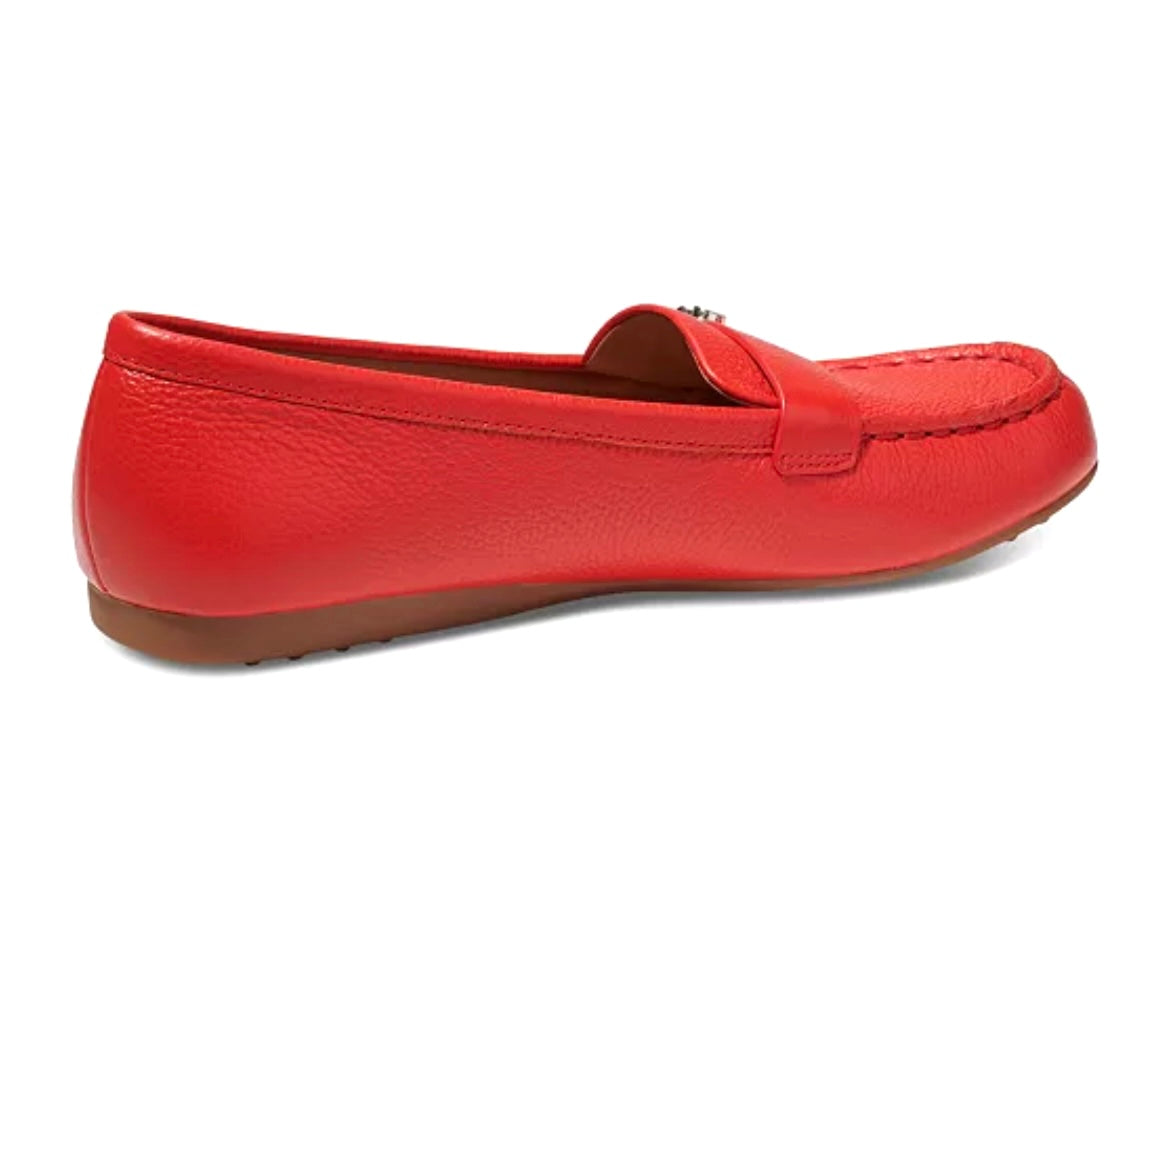 CAMELIA Loafers Flats Slip On Women's Shoes Bright Red